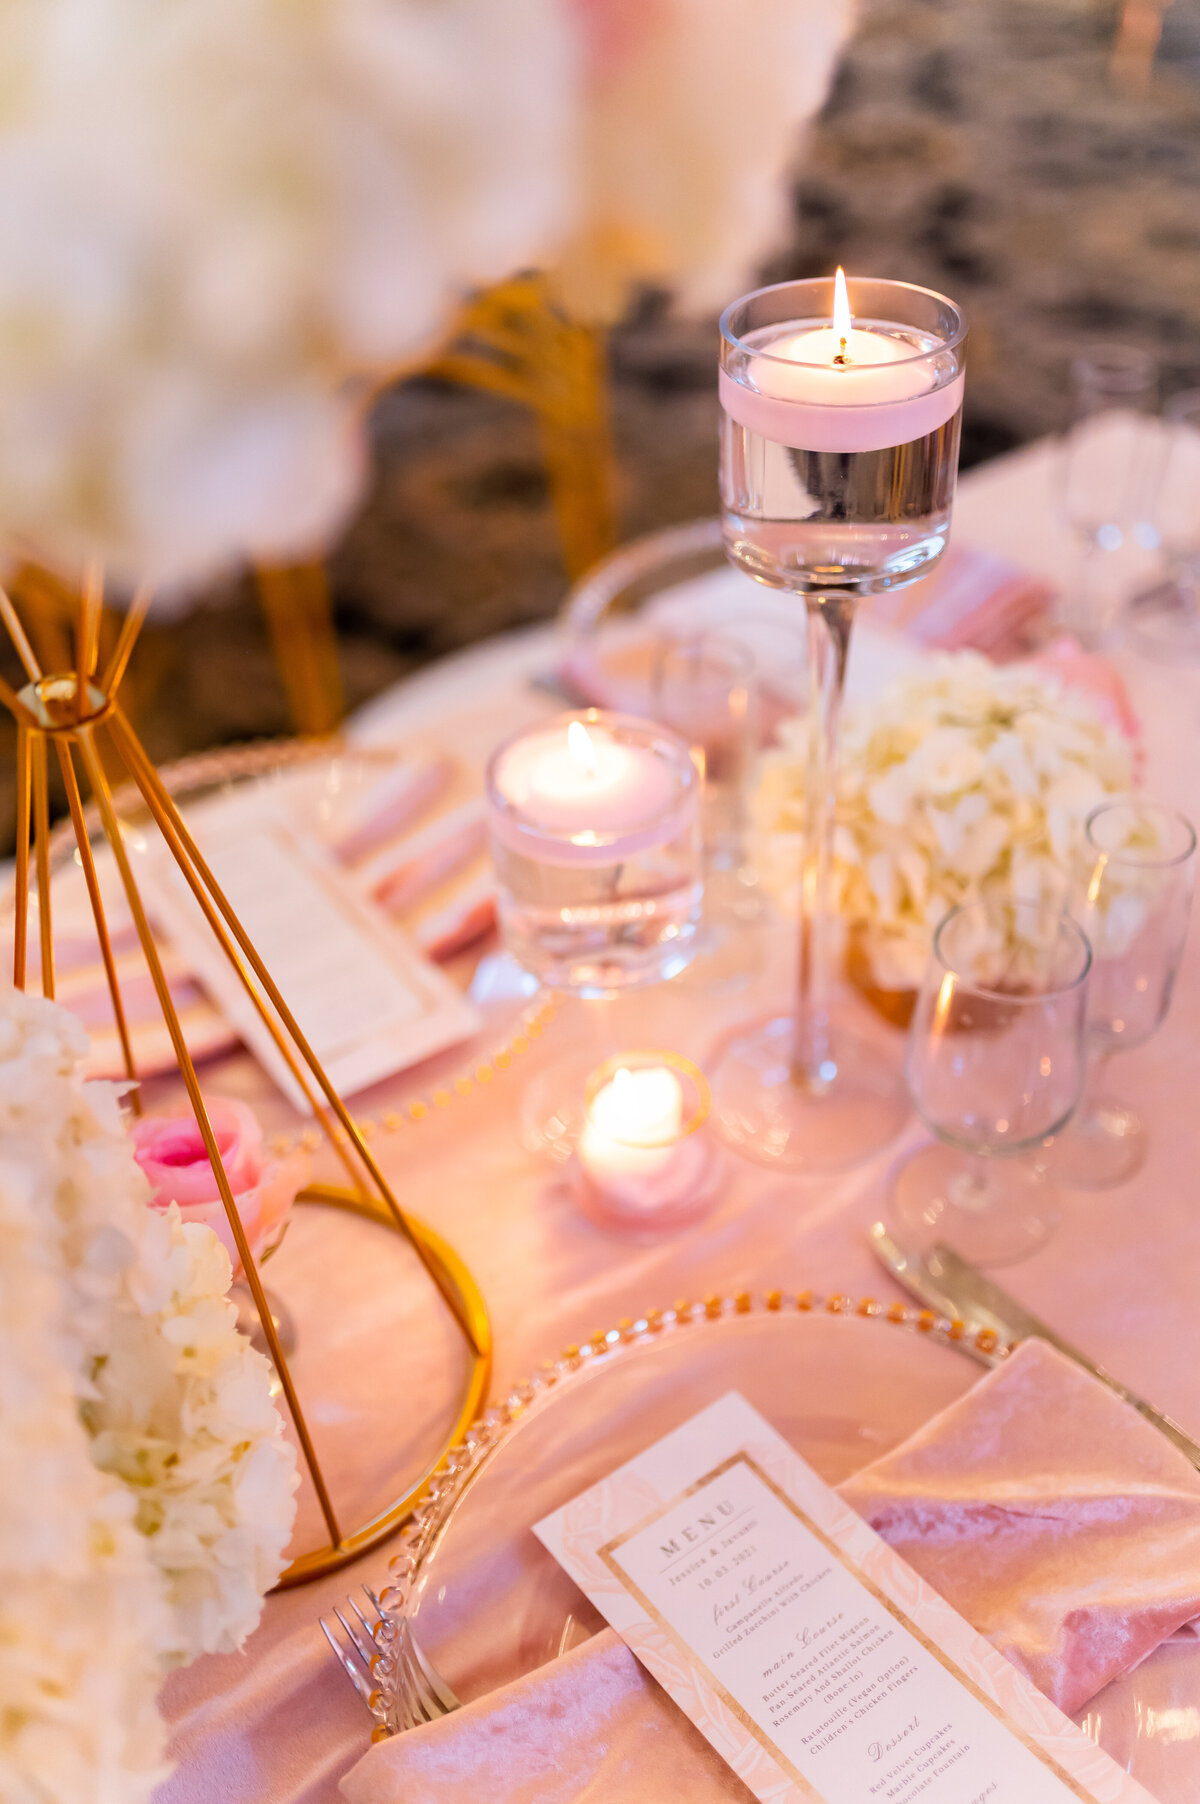 table decorated with a pink cloth, glass plates with gold accents, and glass candle holders